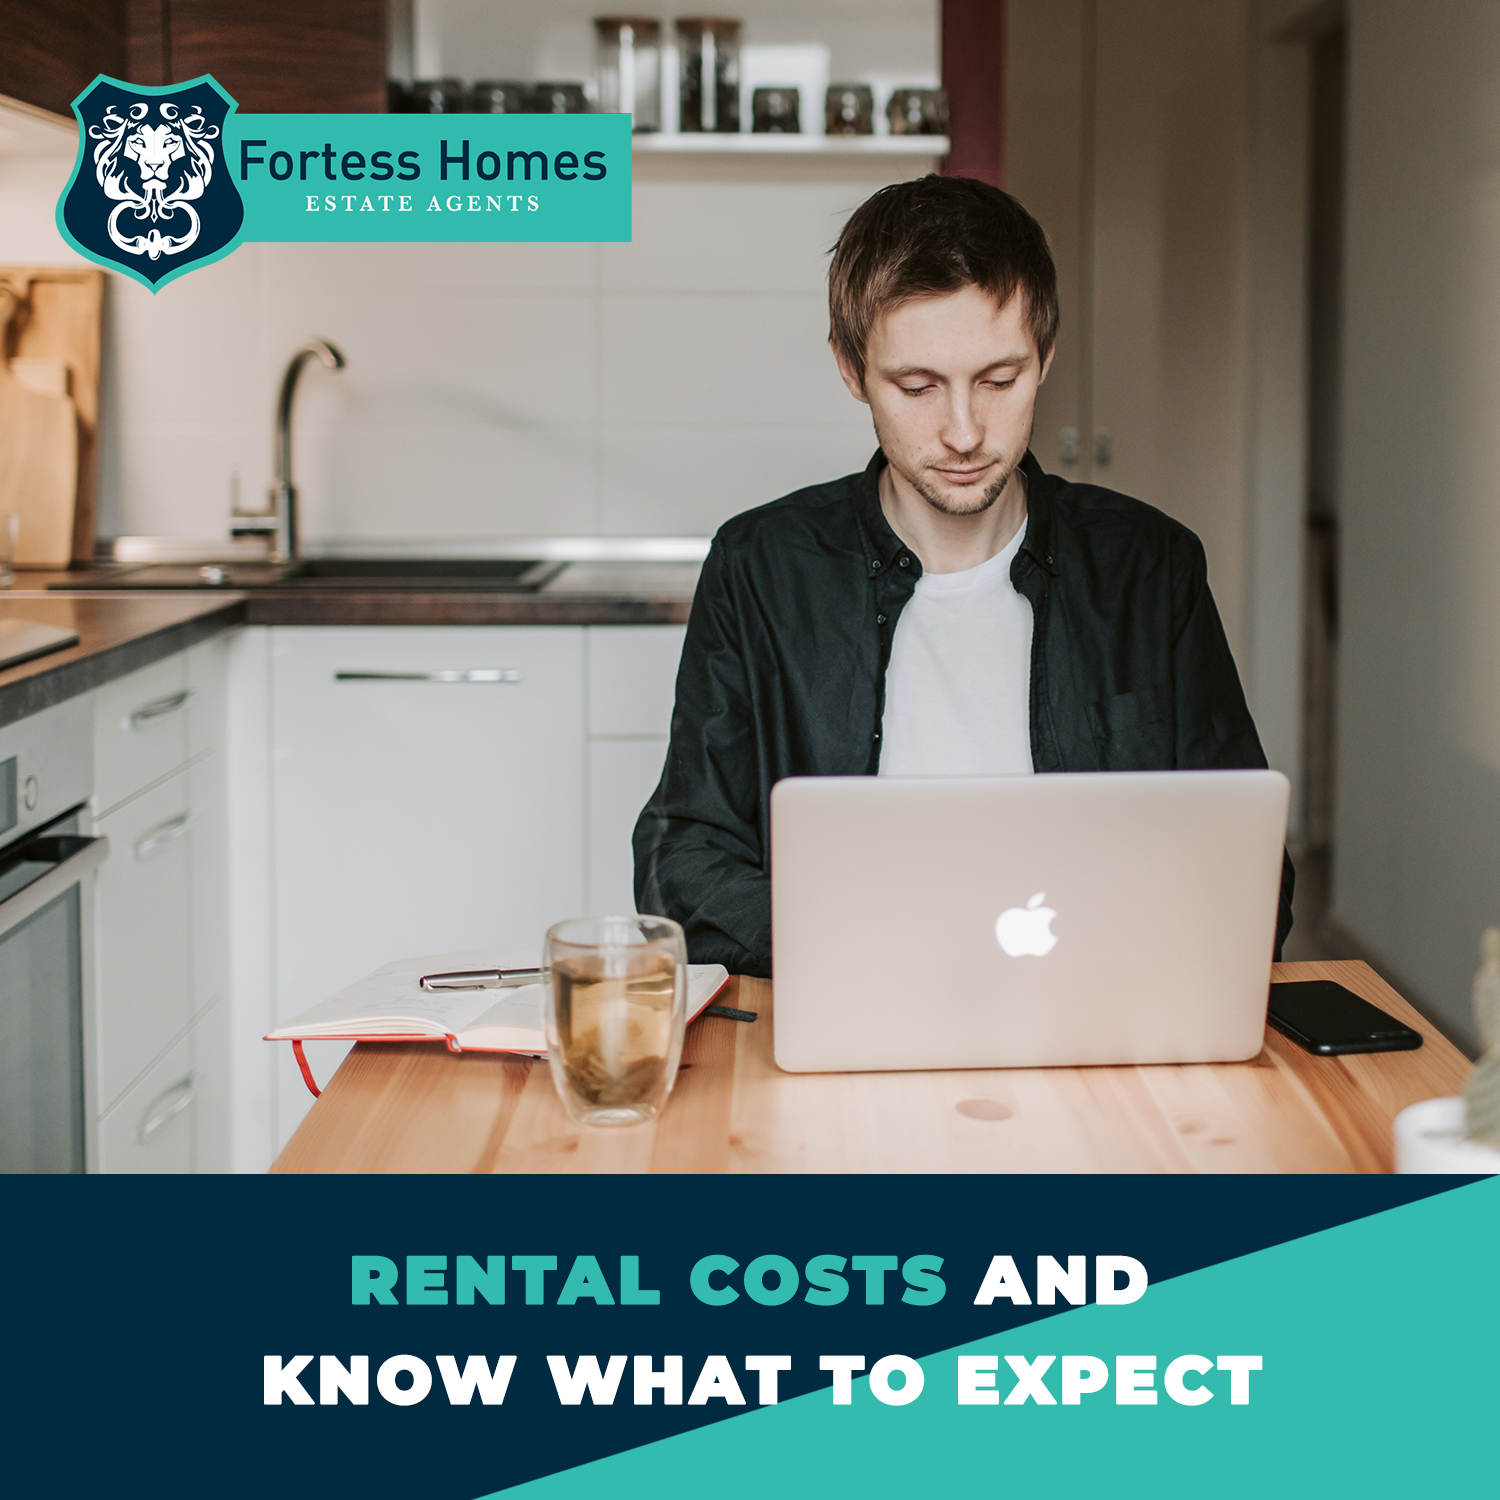 RENTAL COSTS AND KNOW WHAT TO EXPECT